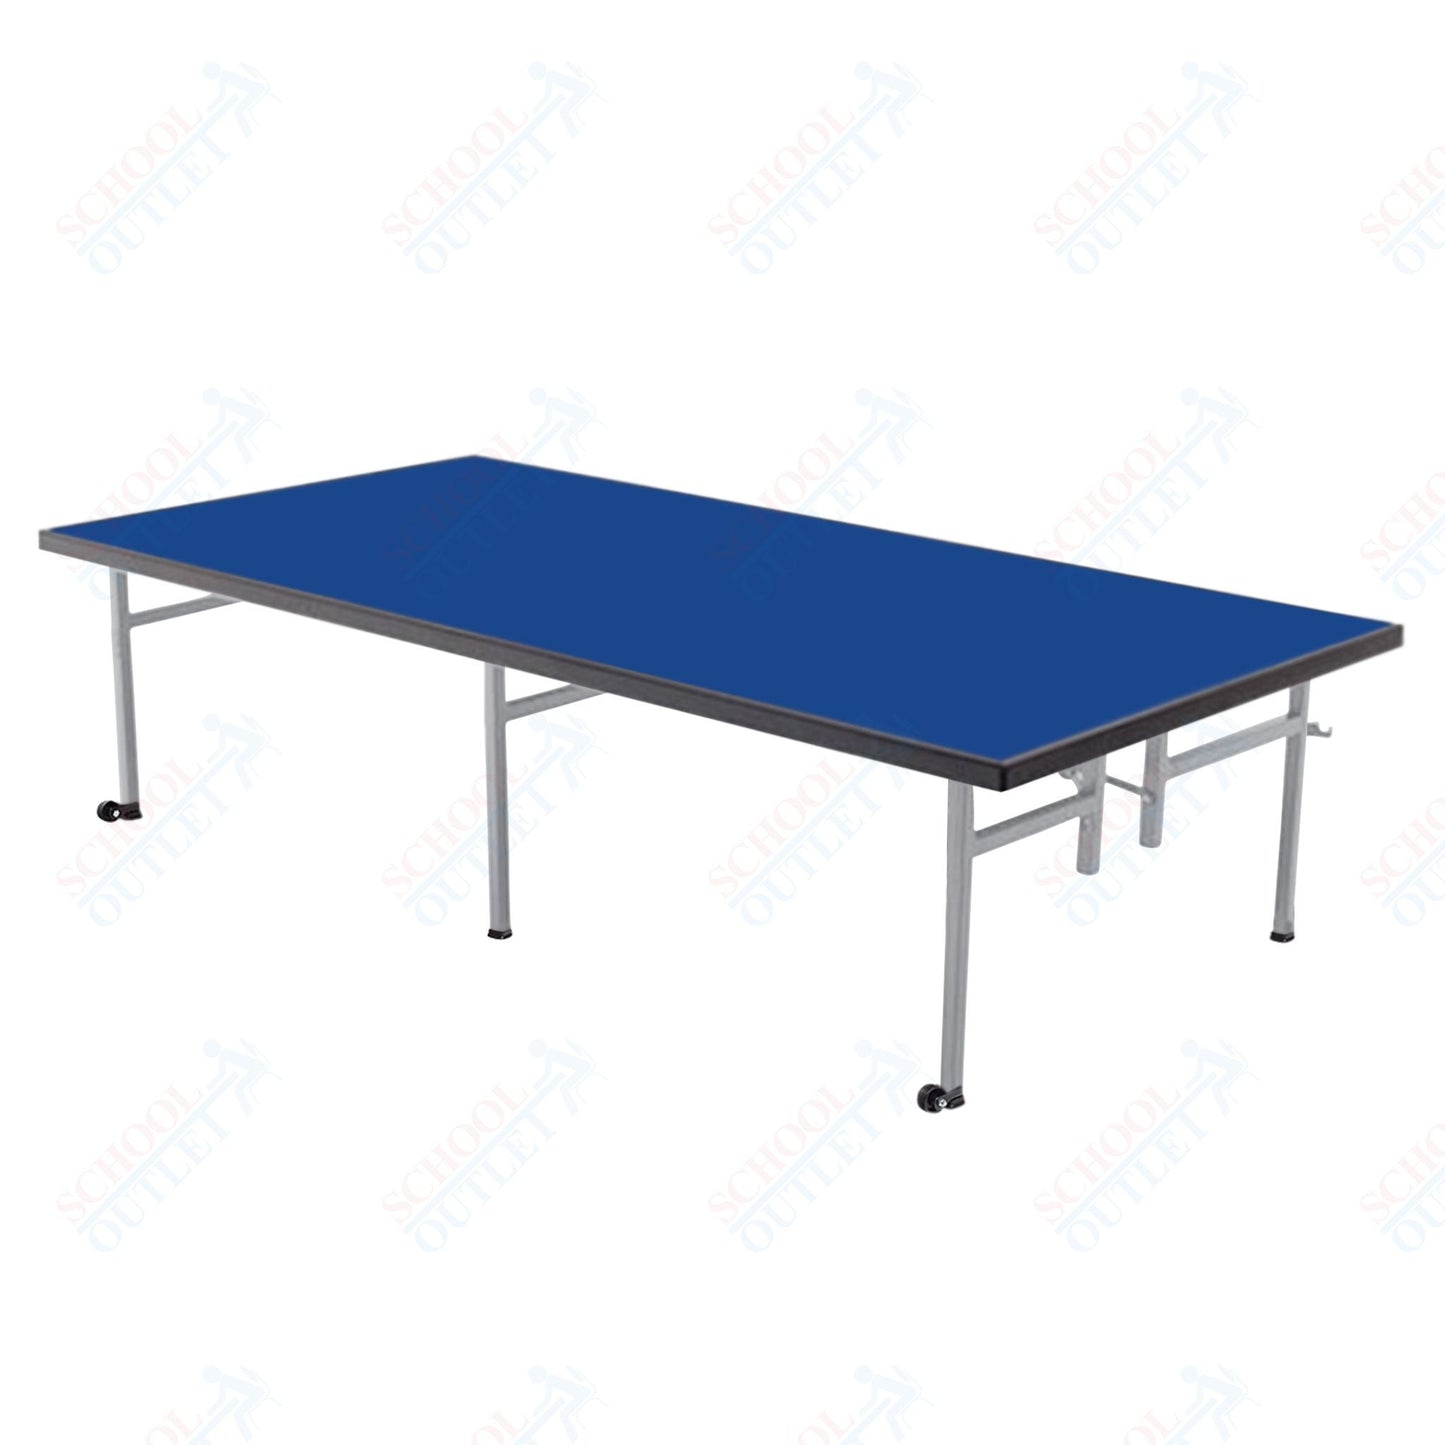 AmTab Fixed Height Stage - Carpet Top - 48"W x 48"L x 16"H (AmTab AMT - ST4416C) - SchoolOutlet